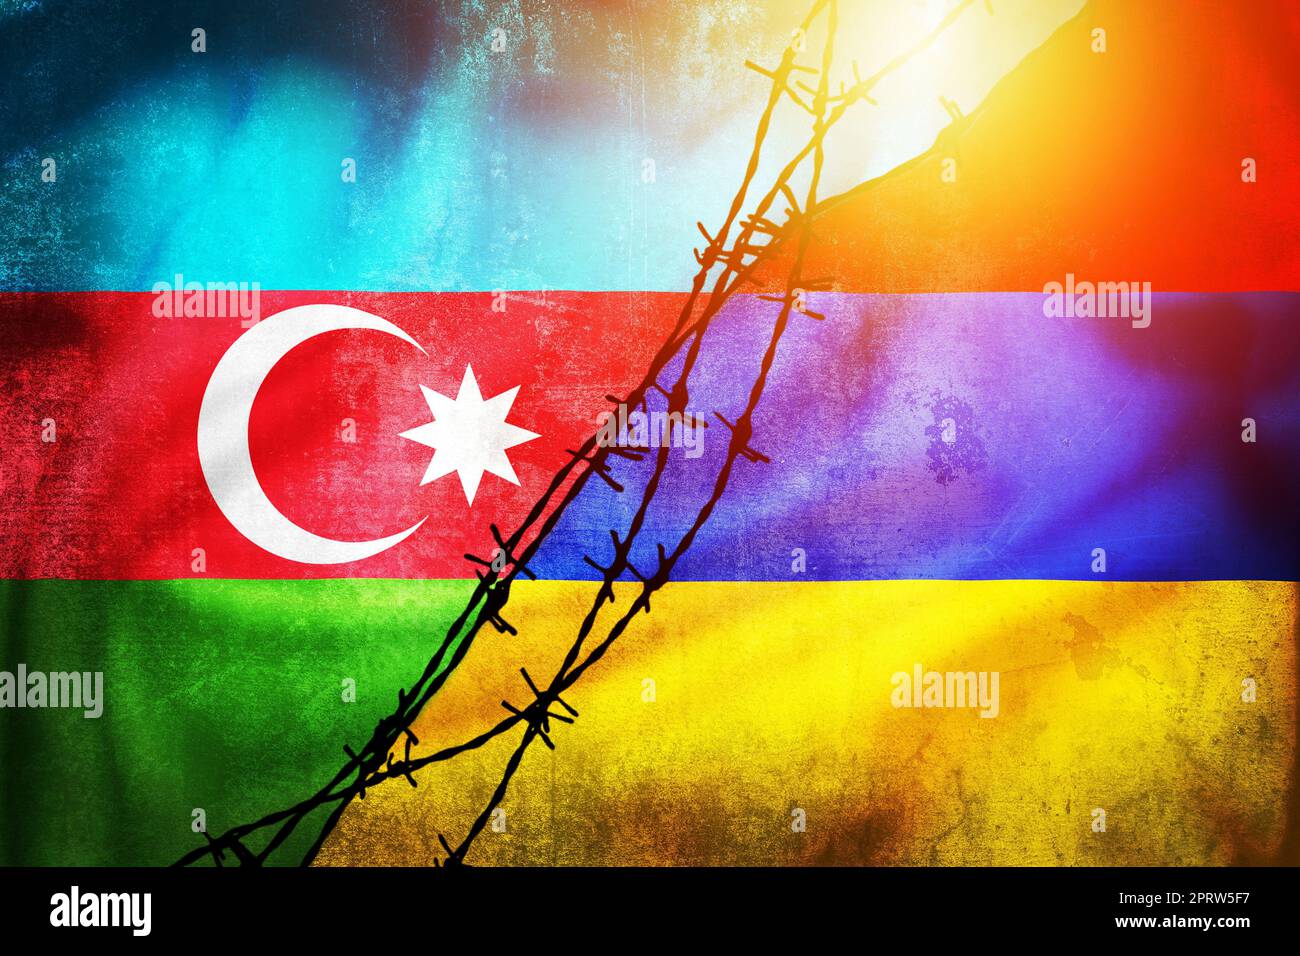 Grunge flags of Azerbaijan and Armenia divided by barb wire illustration sun haze view Stock Photo